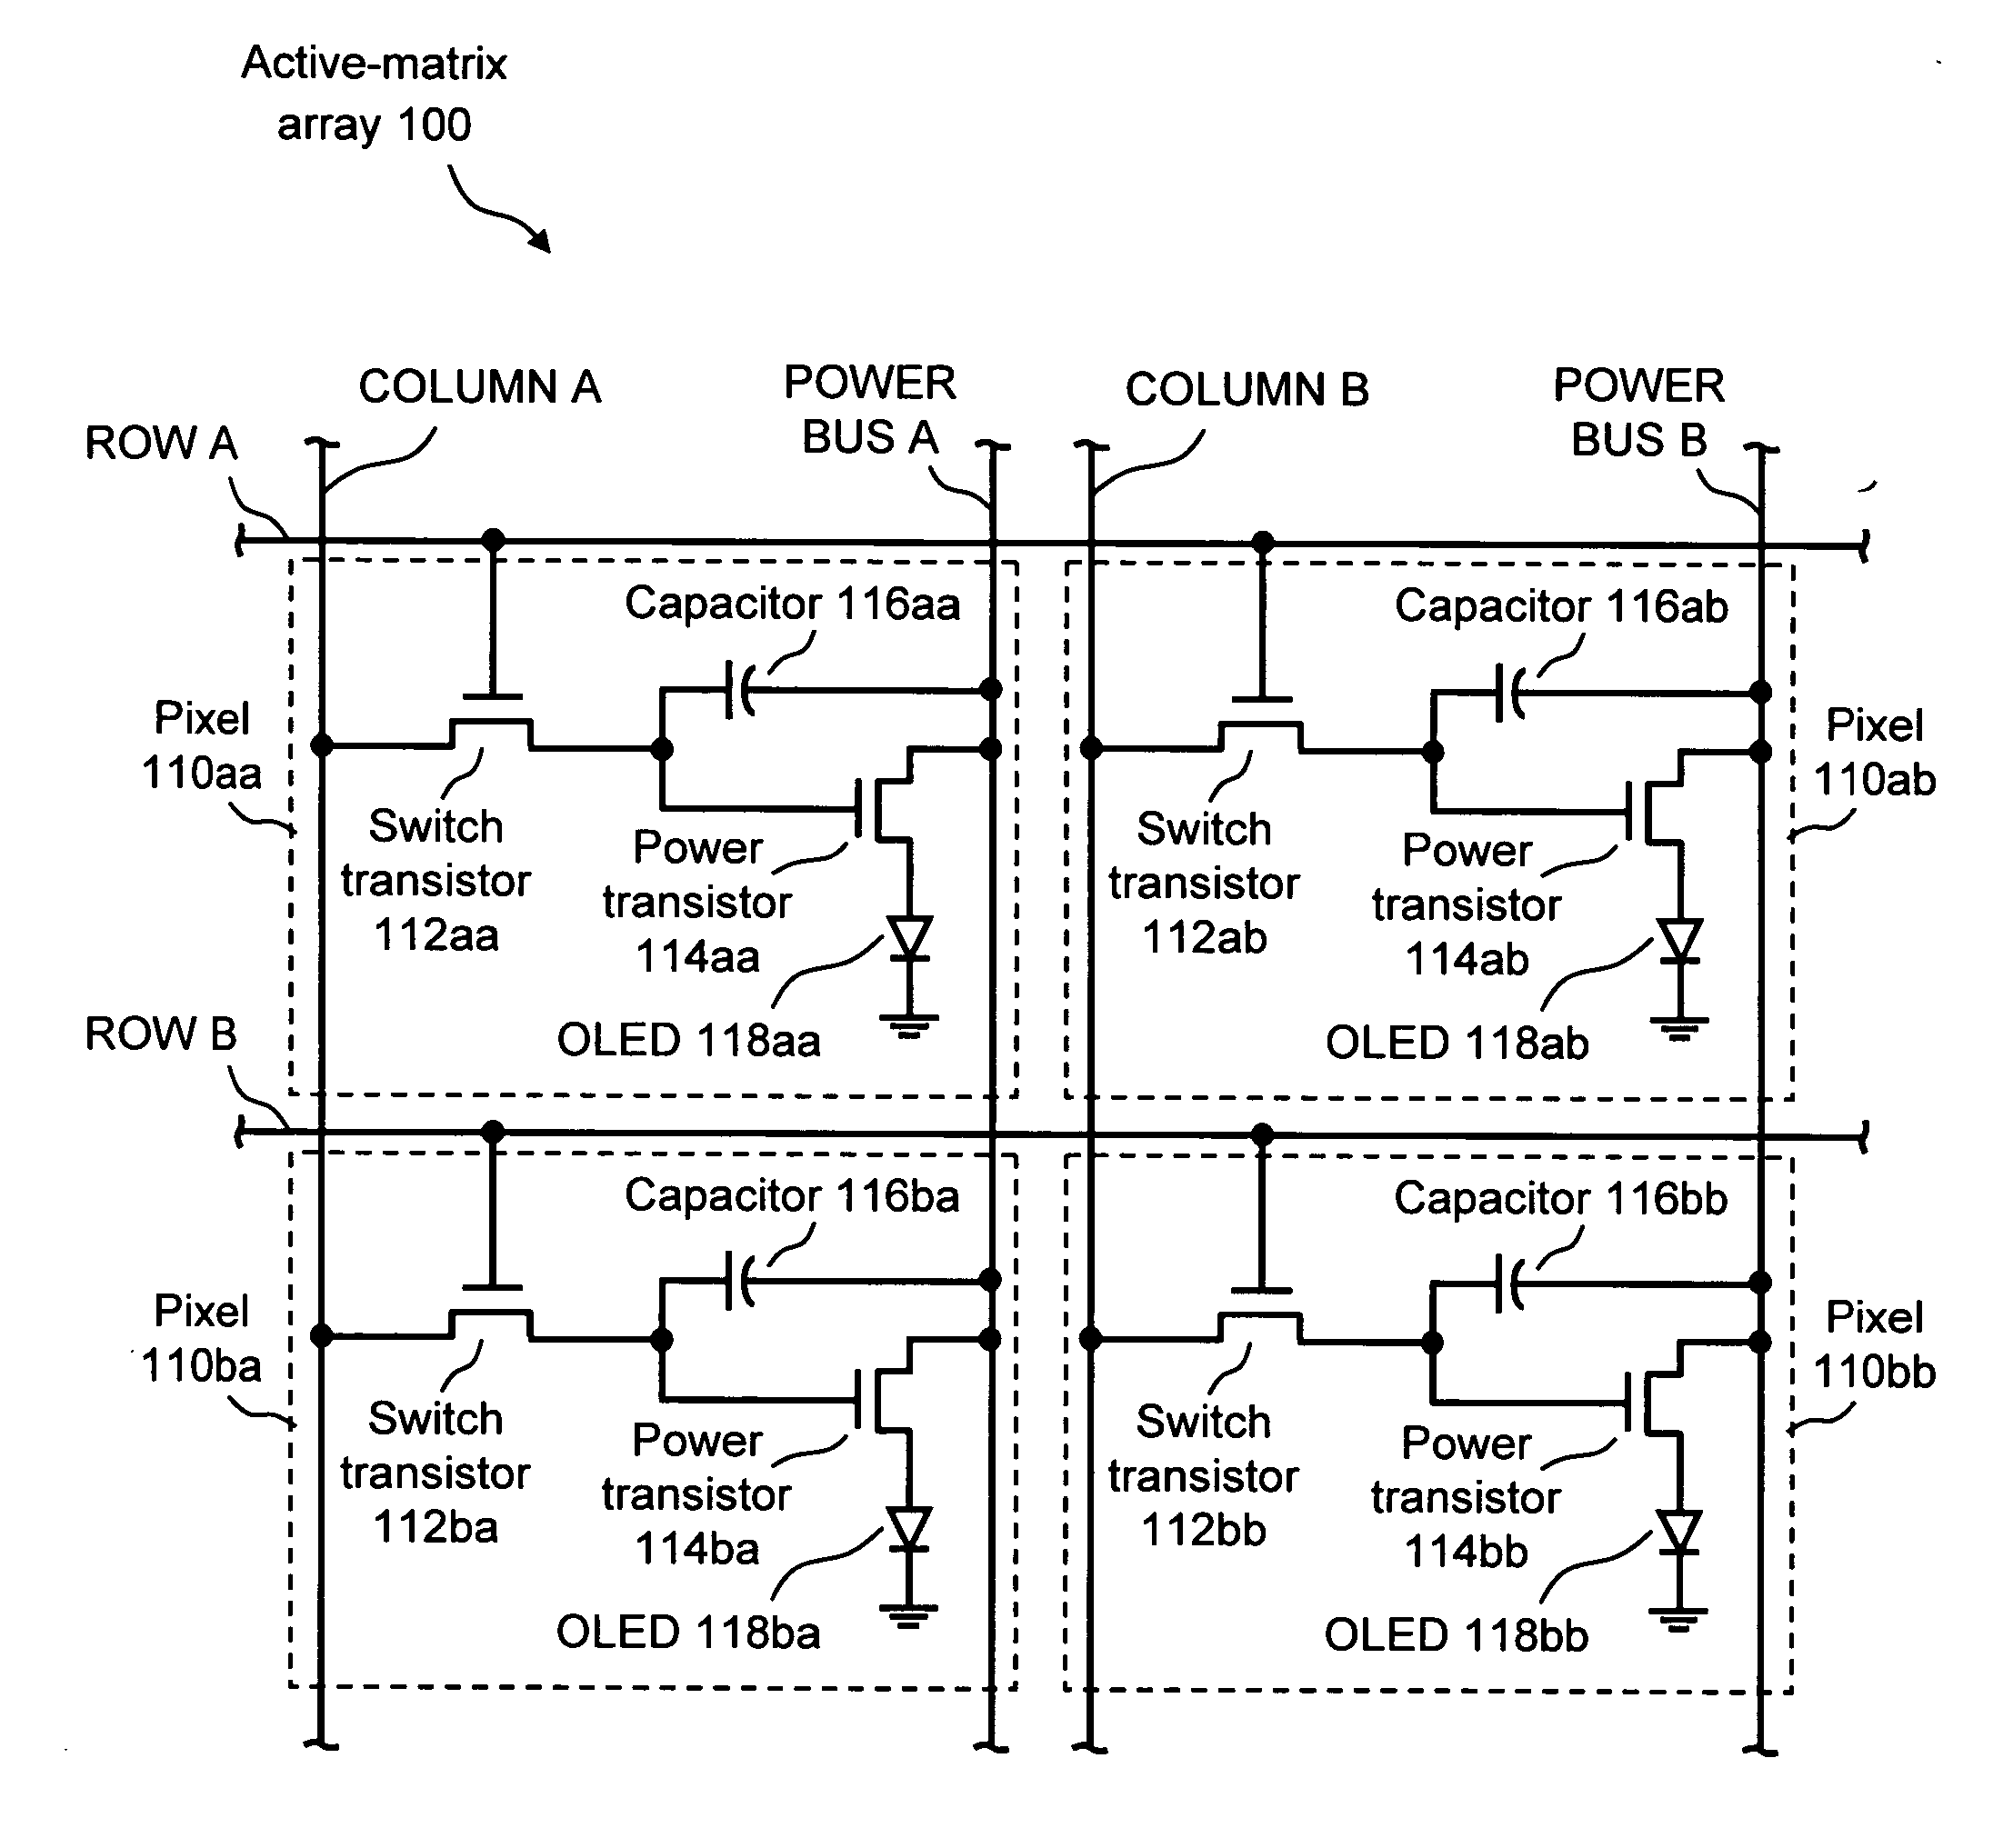 System and method for compensation of active element variations in an active-matrix organic light-emitting diode (OLED) flat-panel display